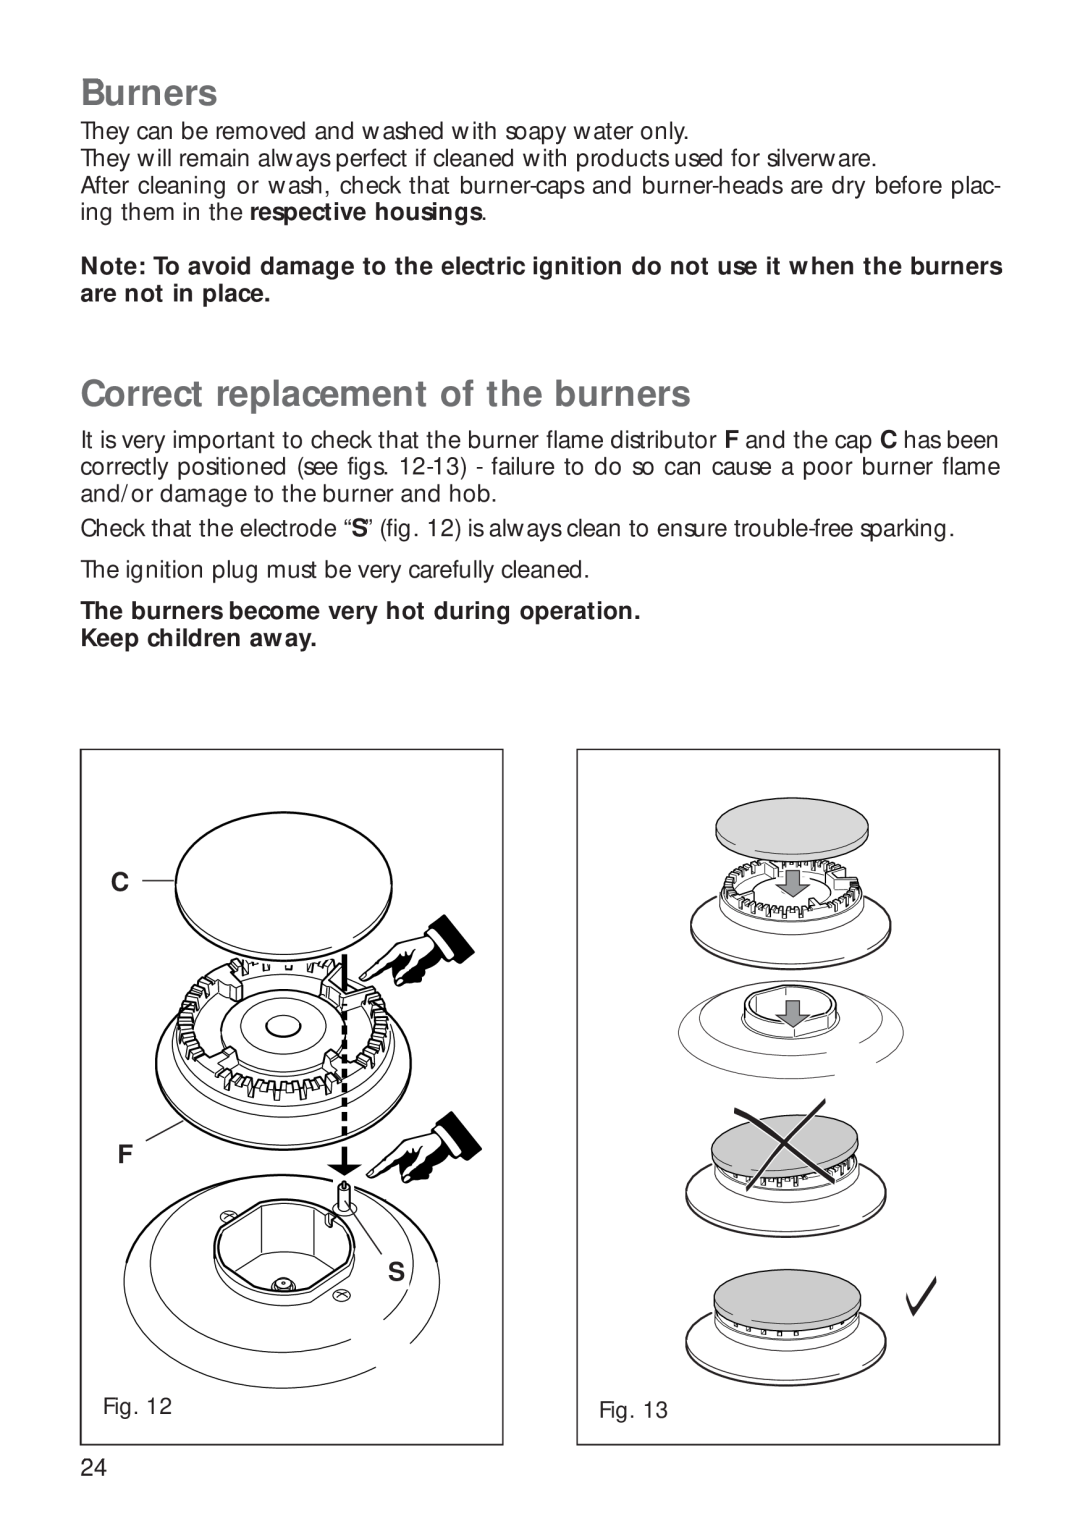 CDA RV 700 installation instructions Burners, Correct replacement of the burners 